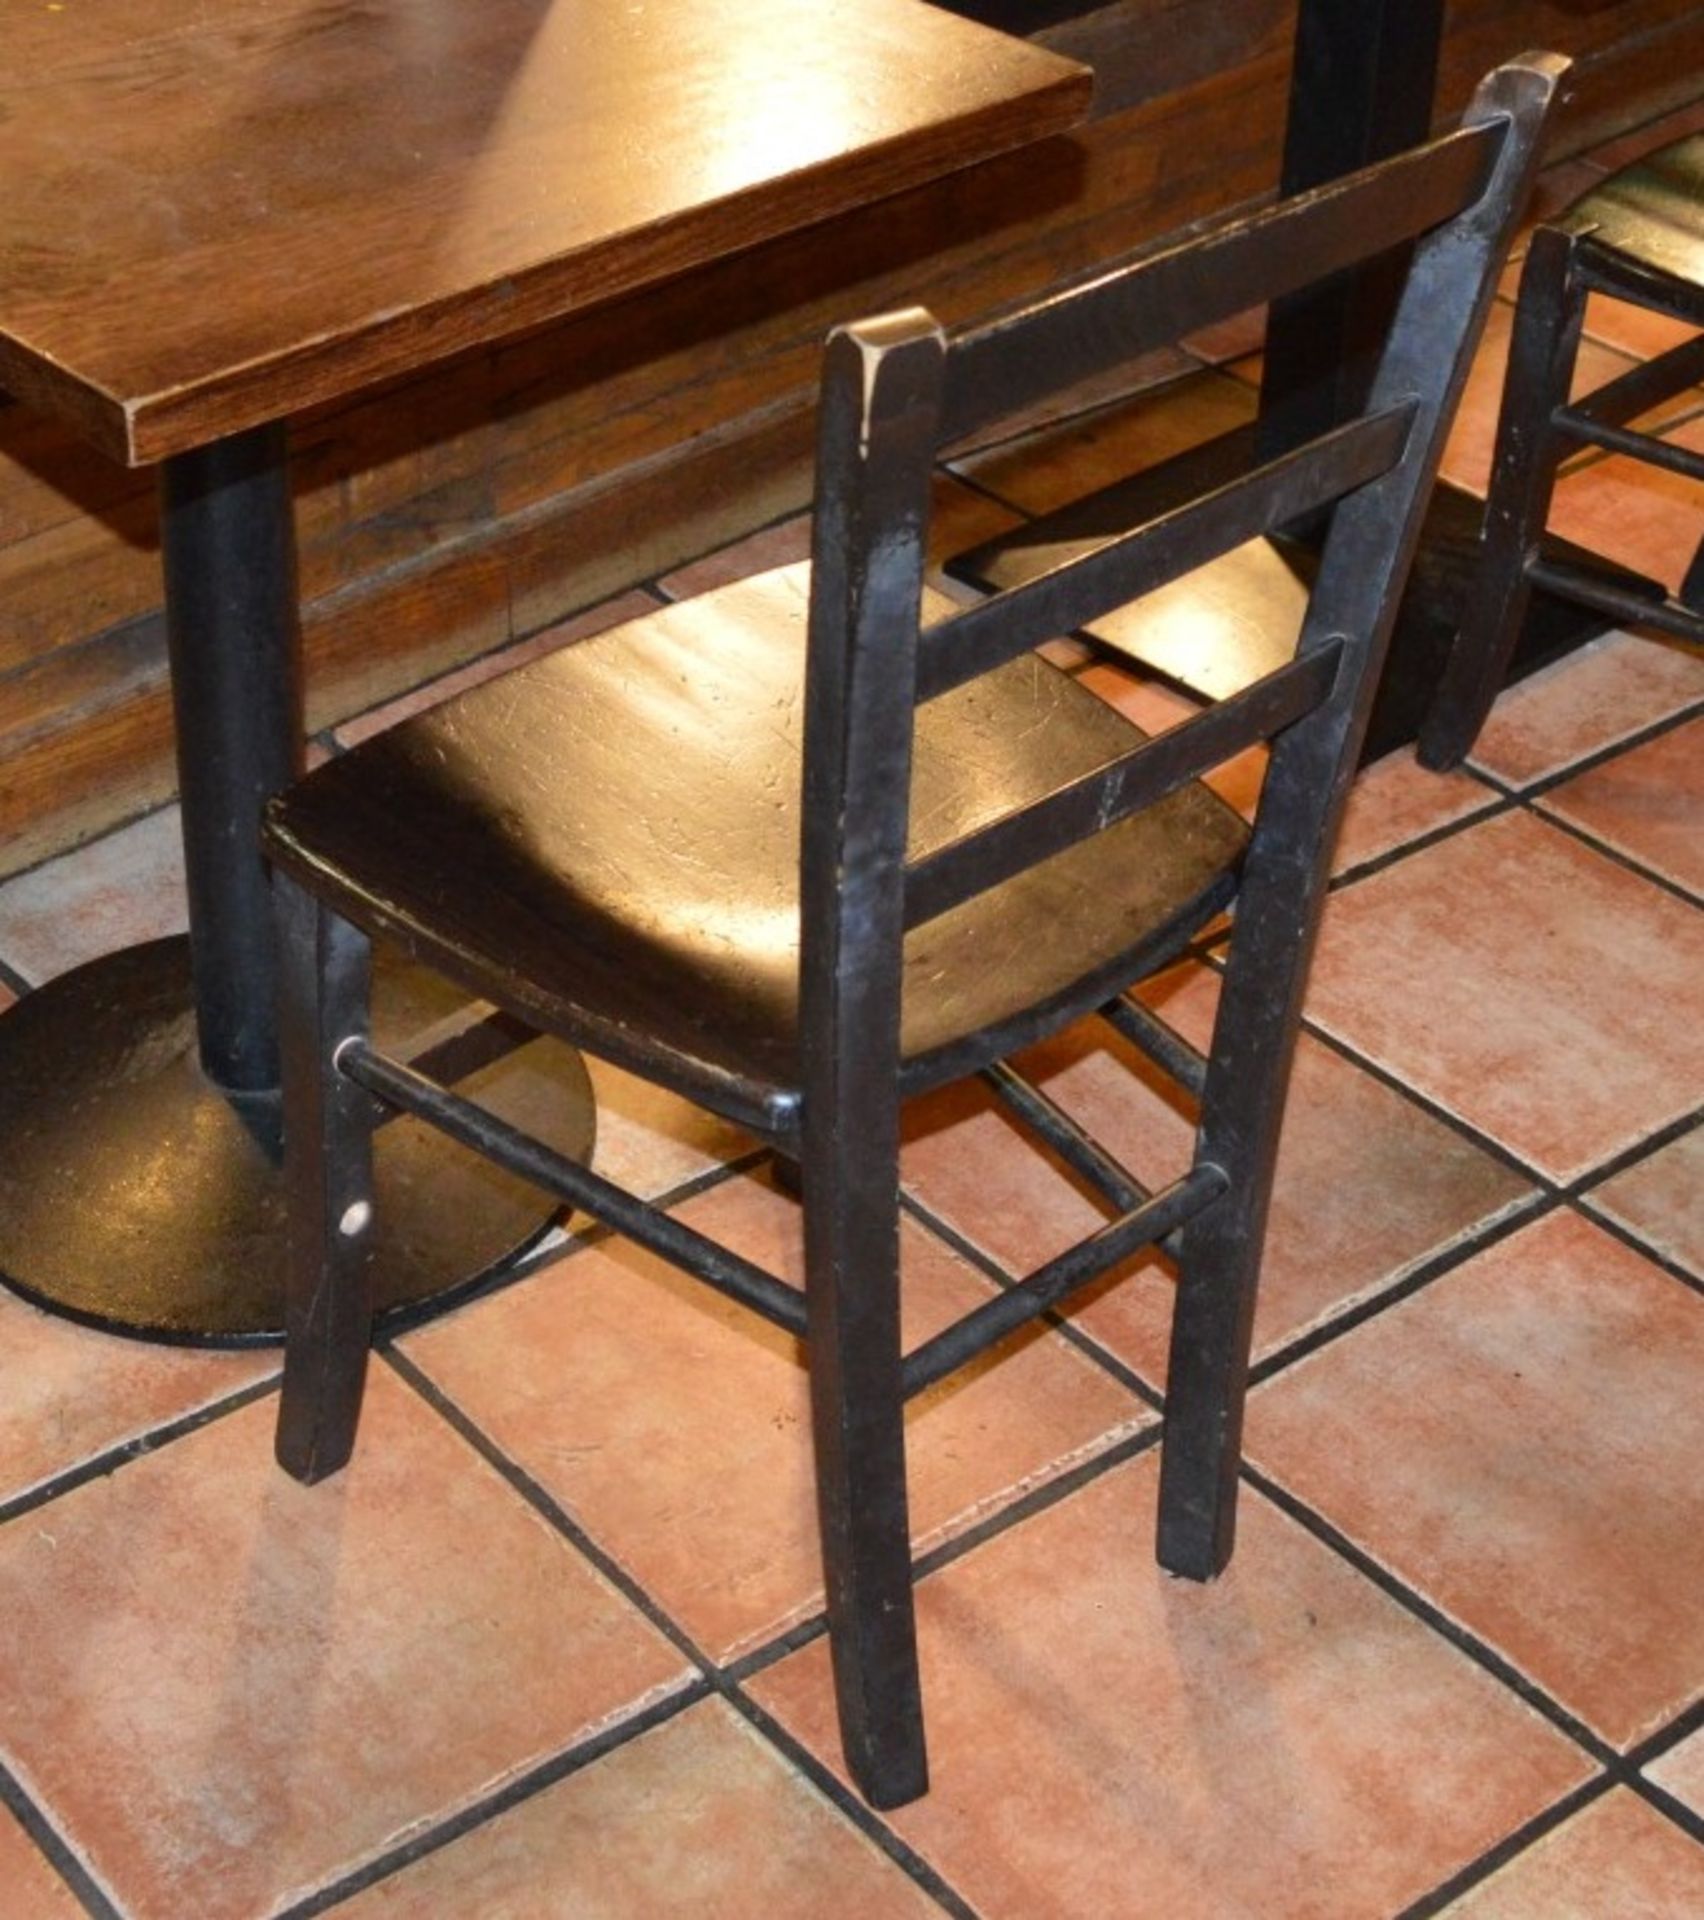 10 x Assorted Rustic Restaurant Dining Chairs - Taken From A Popular Eatery - Manchester M17 - Image 6 of 6